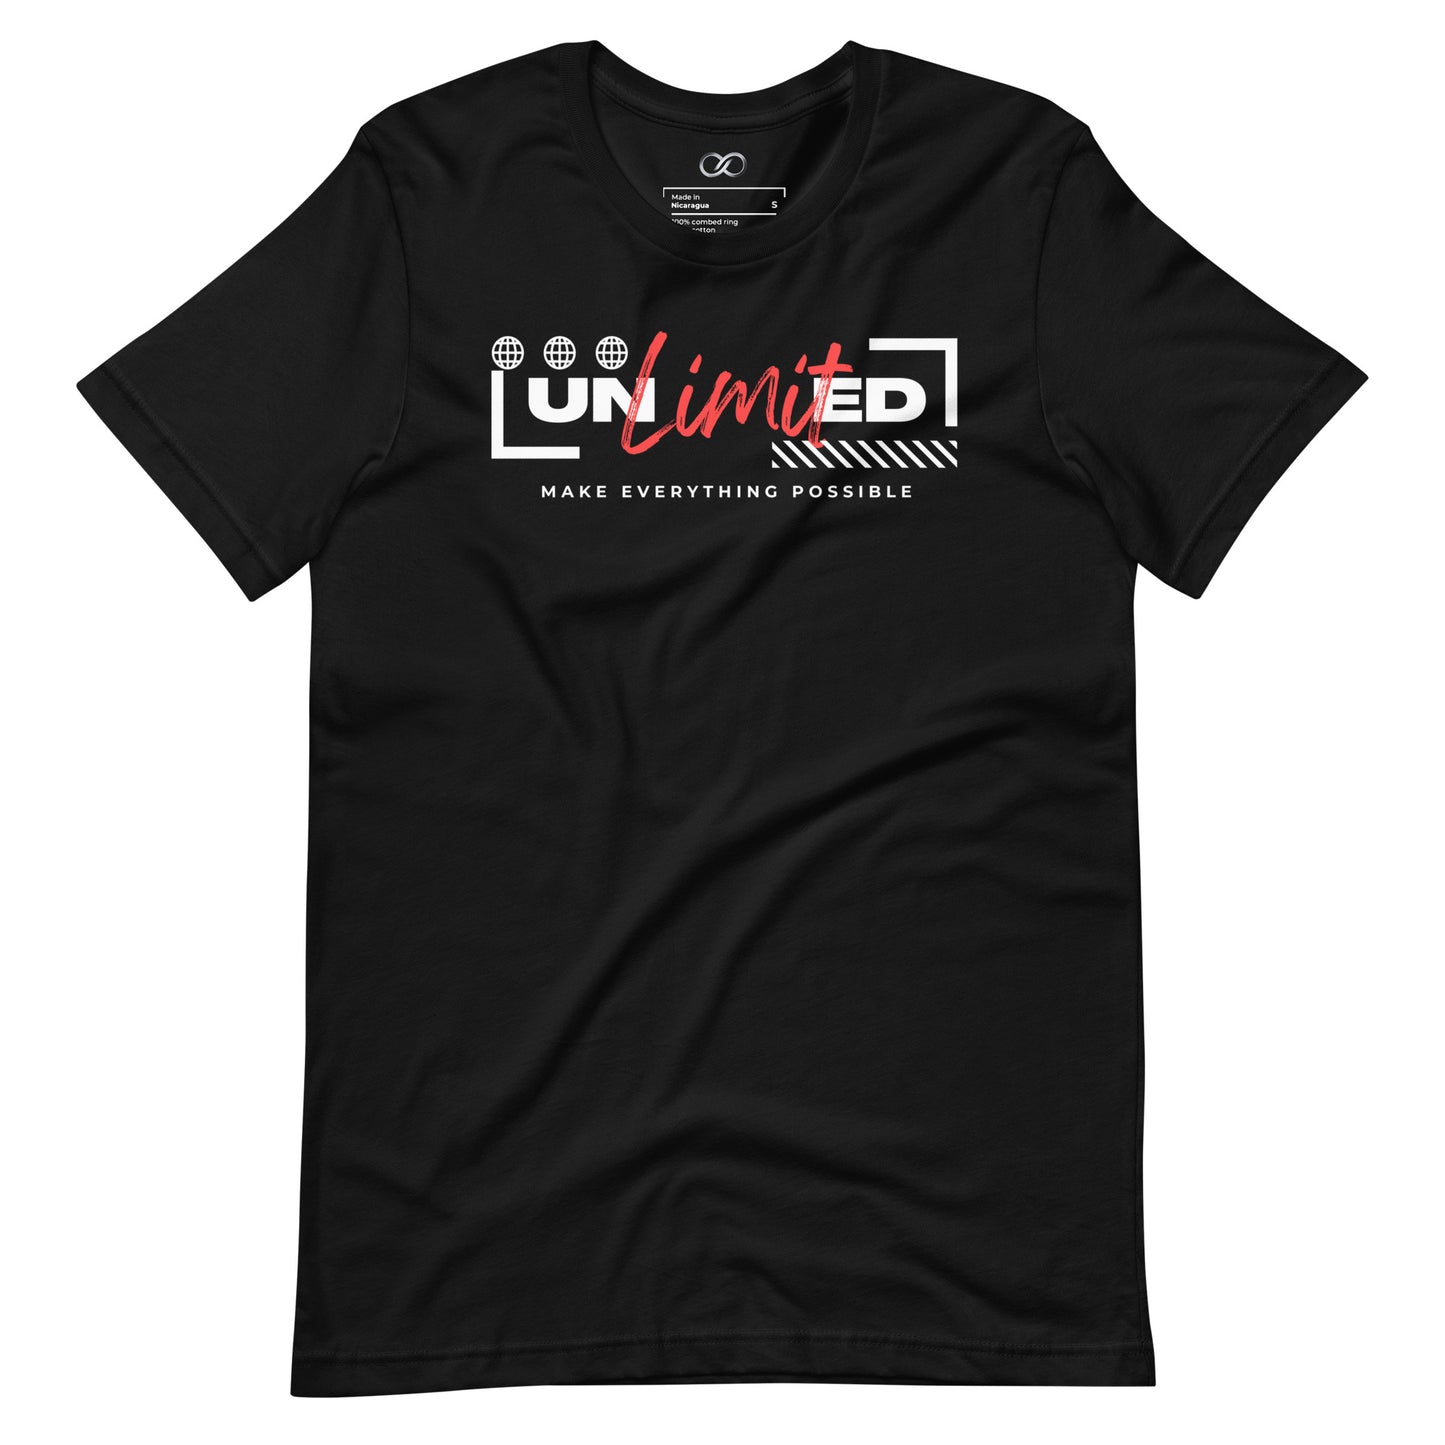 Unlimited Graphic Tee - Empowering Motivational T-Shirt